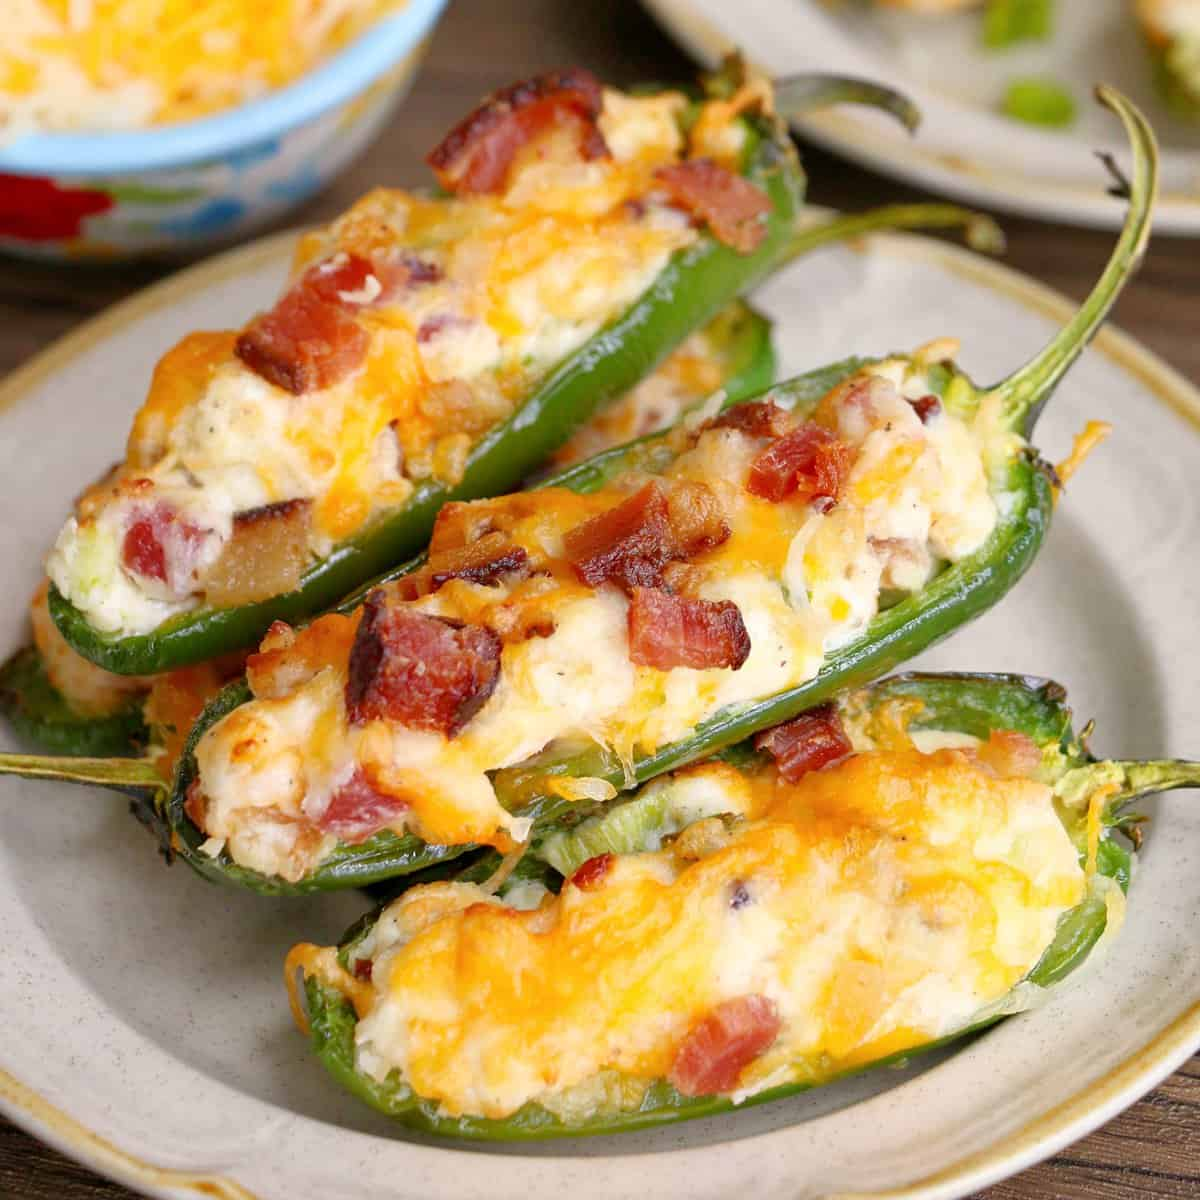 Jalapeno Poppers - Stuffed with Cream Cheese, Topped with Cheese and Bacon, a Spicy and Cheesy Delight for Brisket